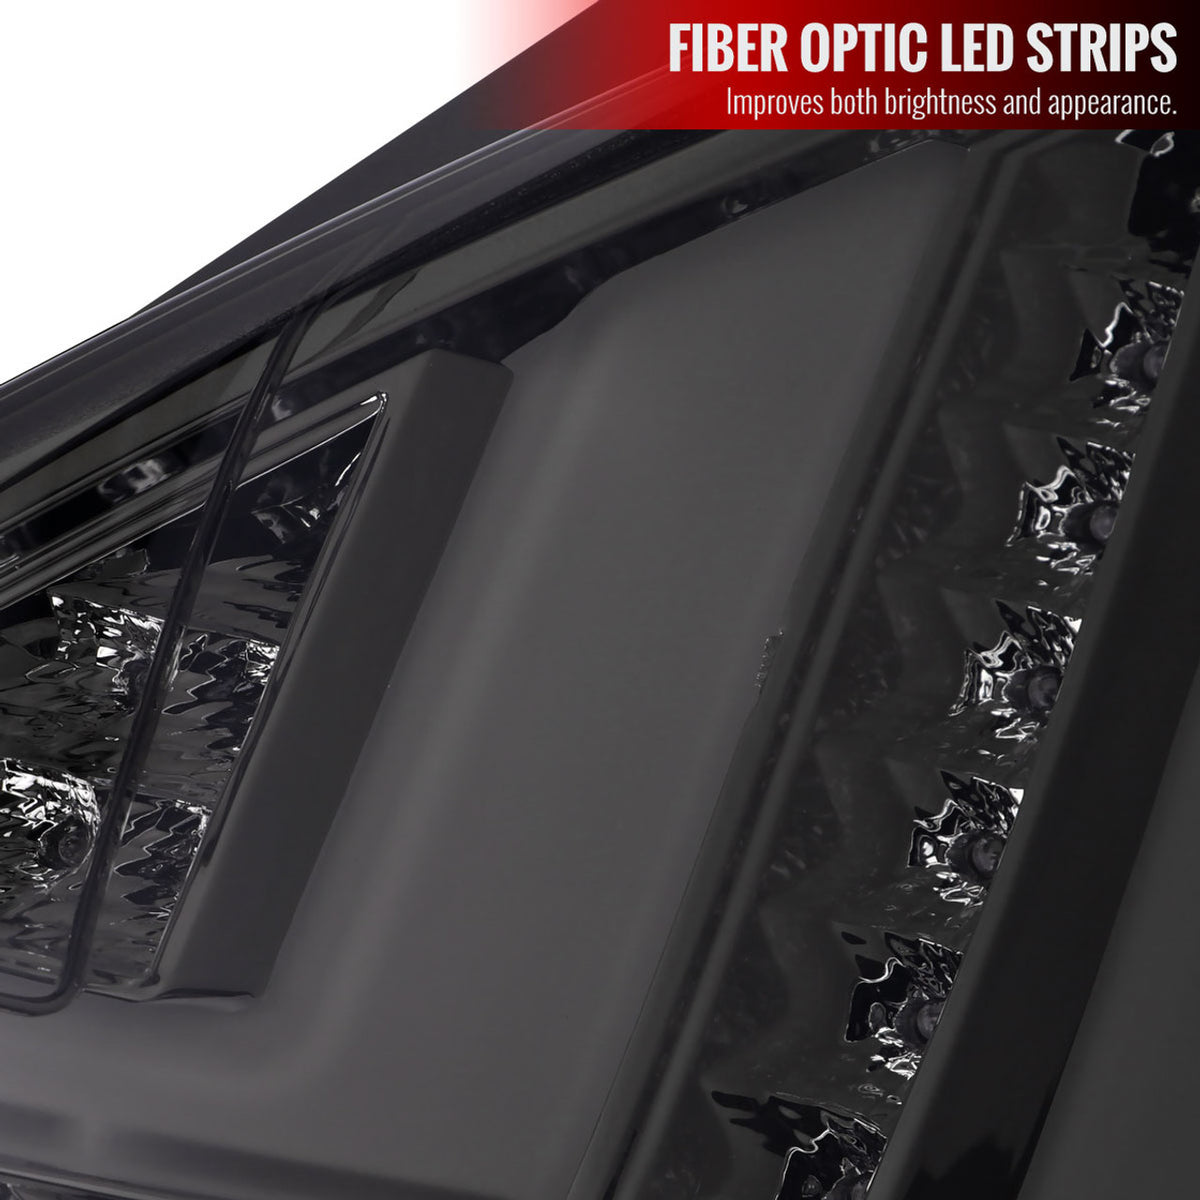 Spec-D 14-19 Ford Fiesta Hatchback LED Bar Tail Light - New - No repining Required -Chrome Housing-Smoke Lens